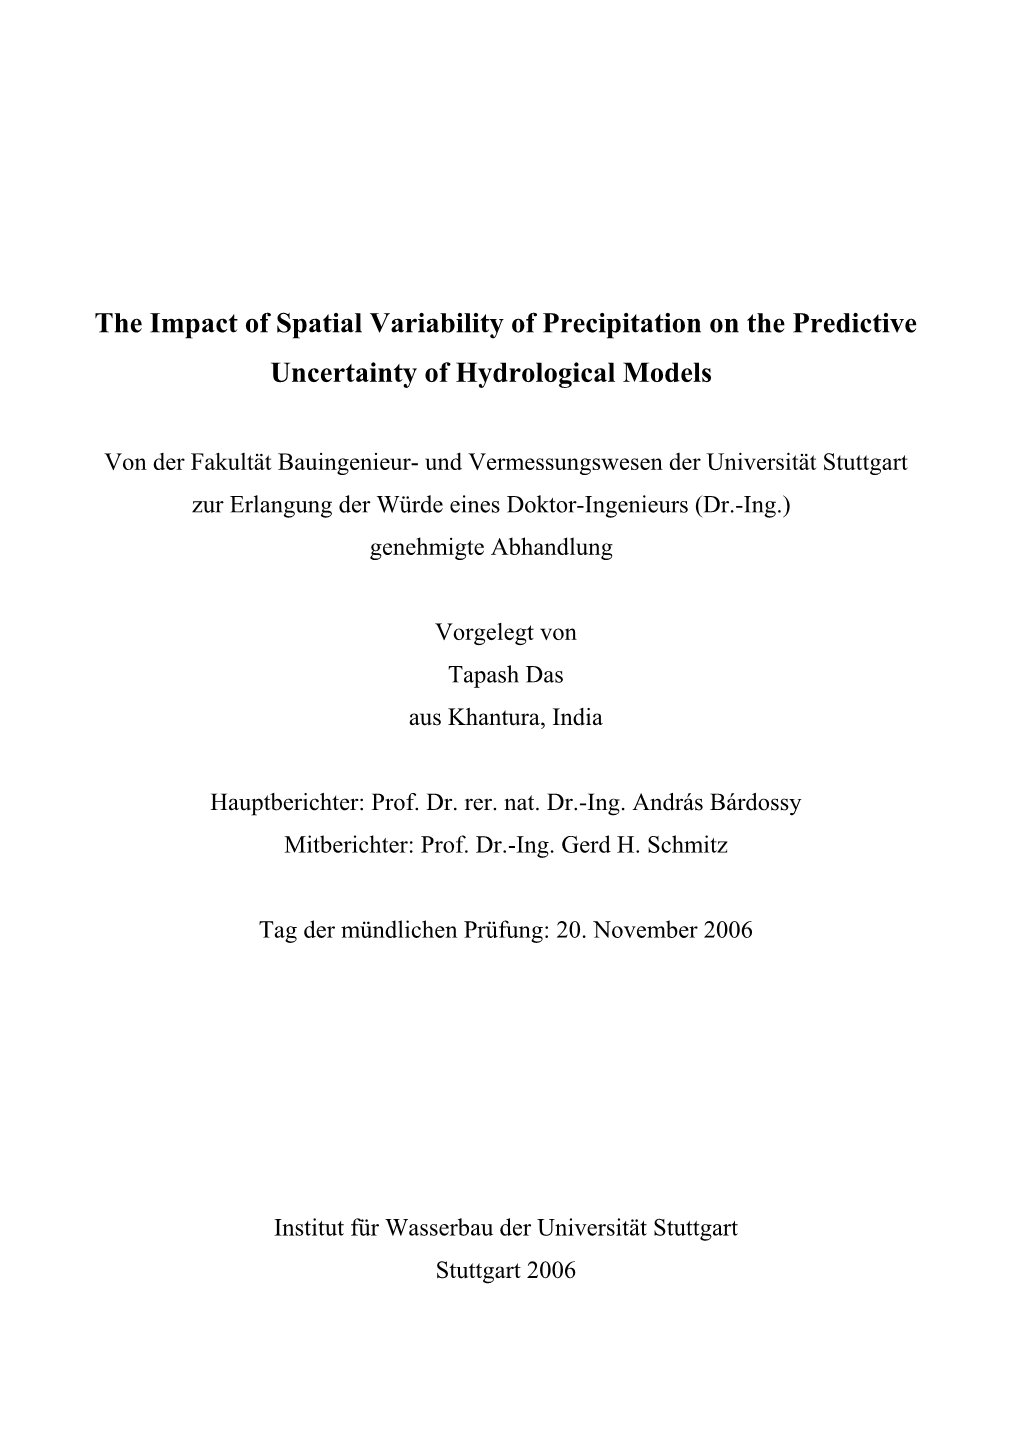 The Impact of Spatial Variability of Precipitation on the Predictive Uncertainty of Hydrological Models